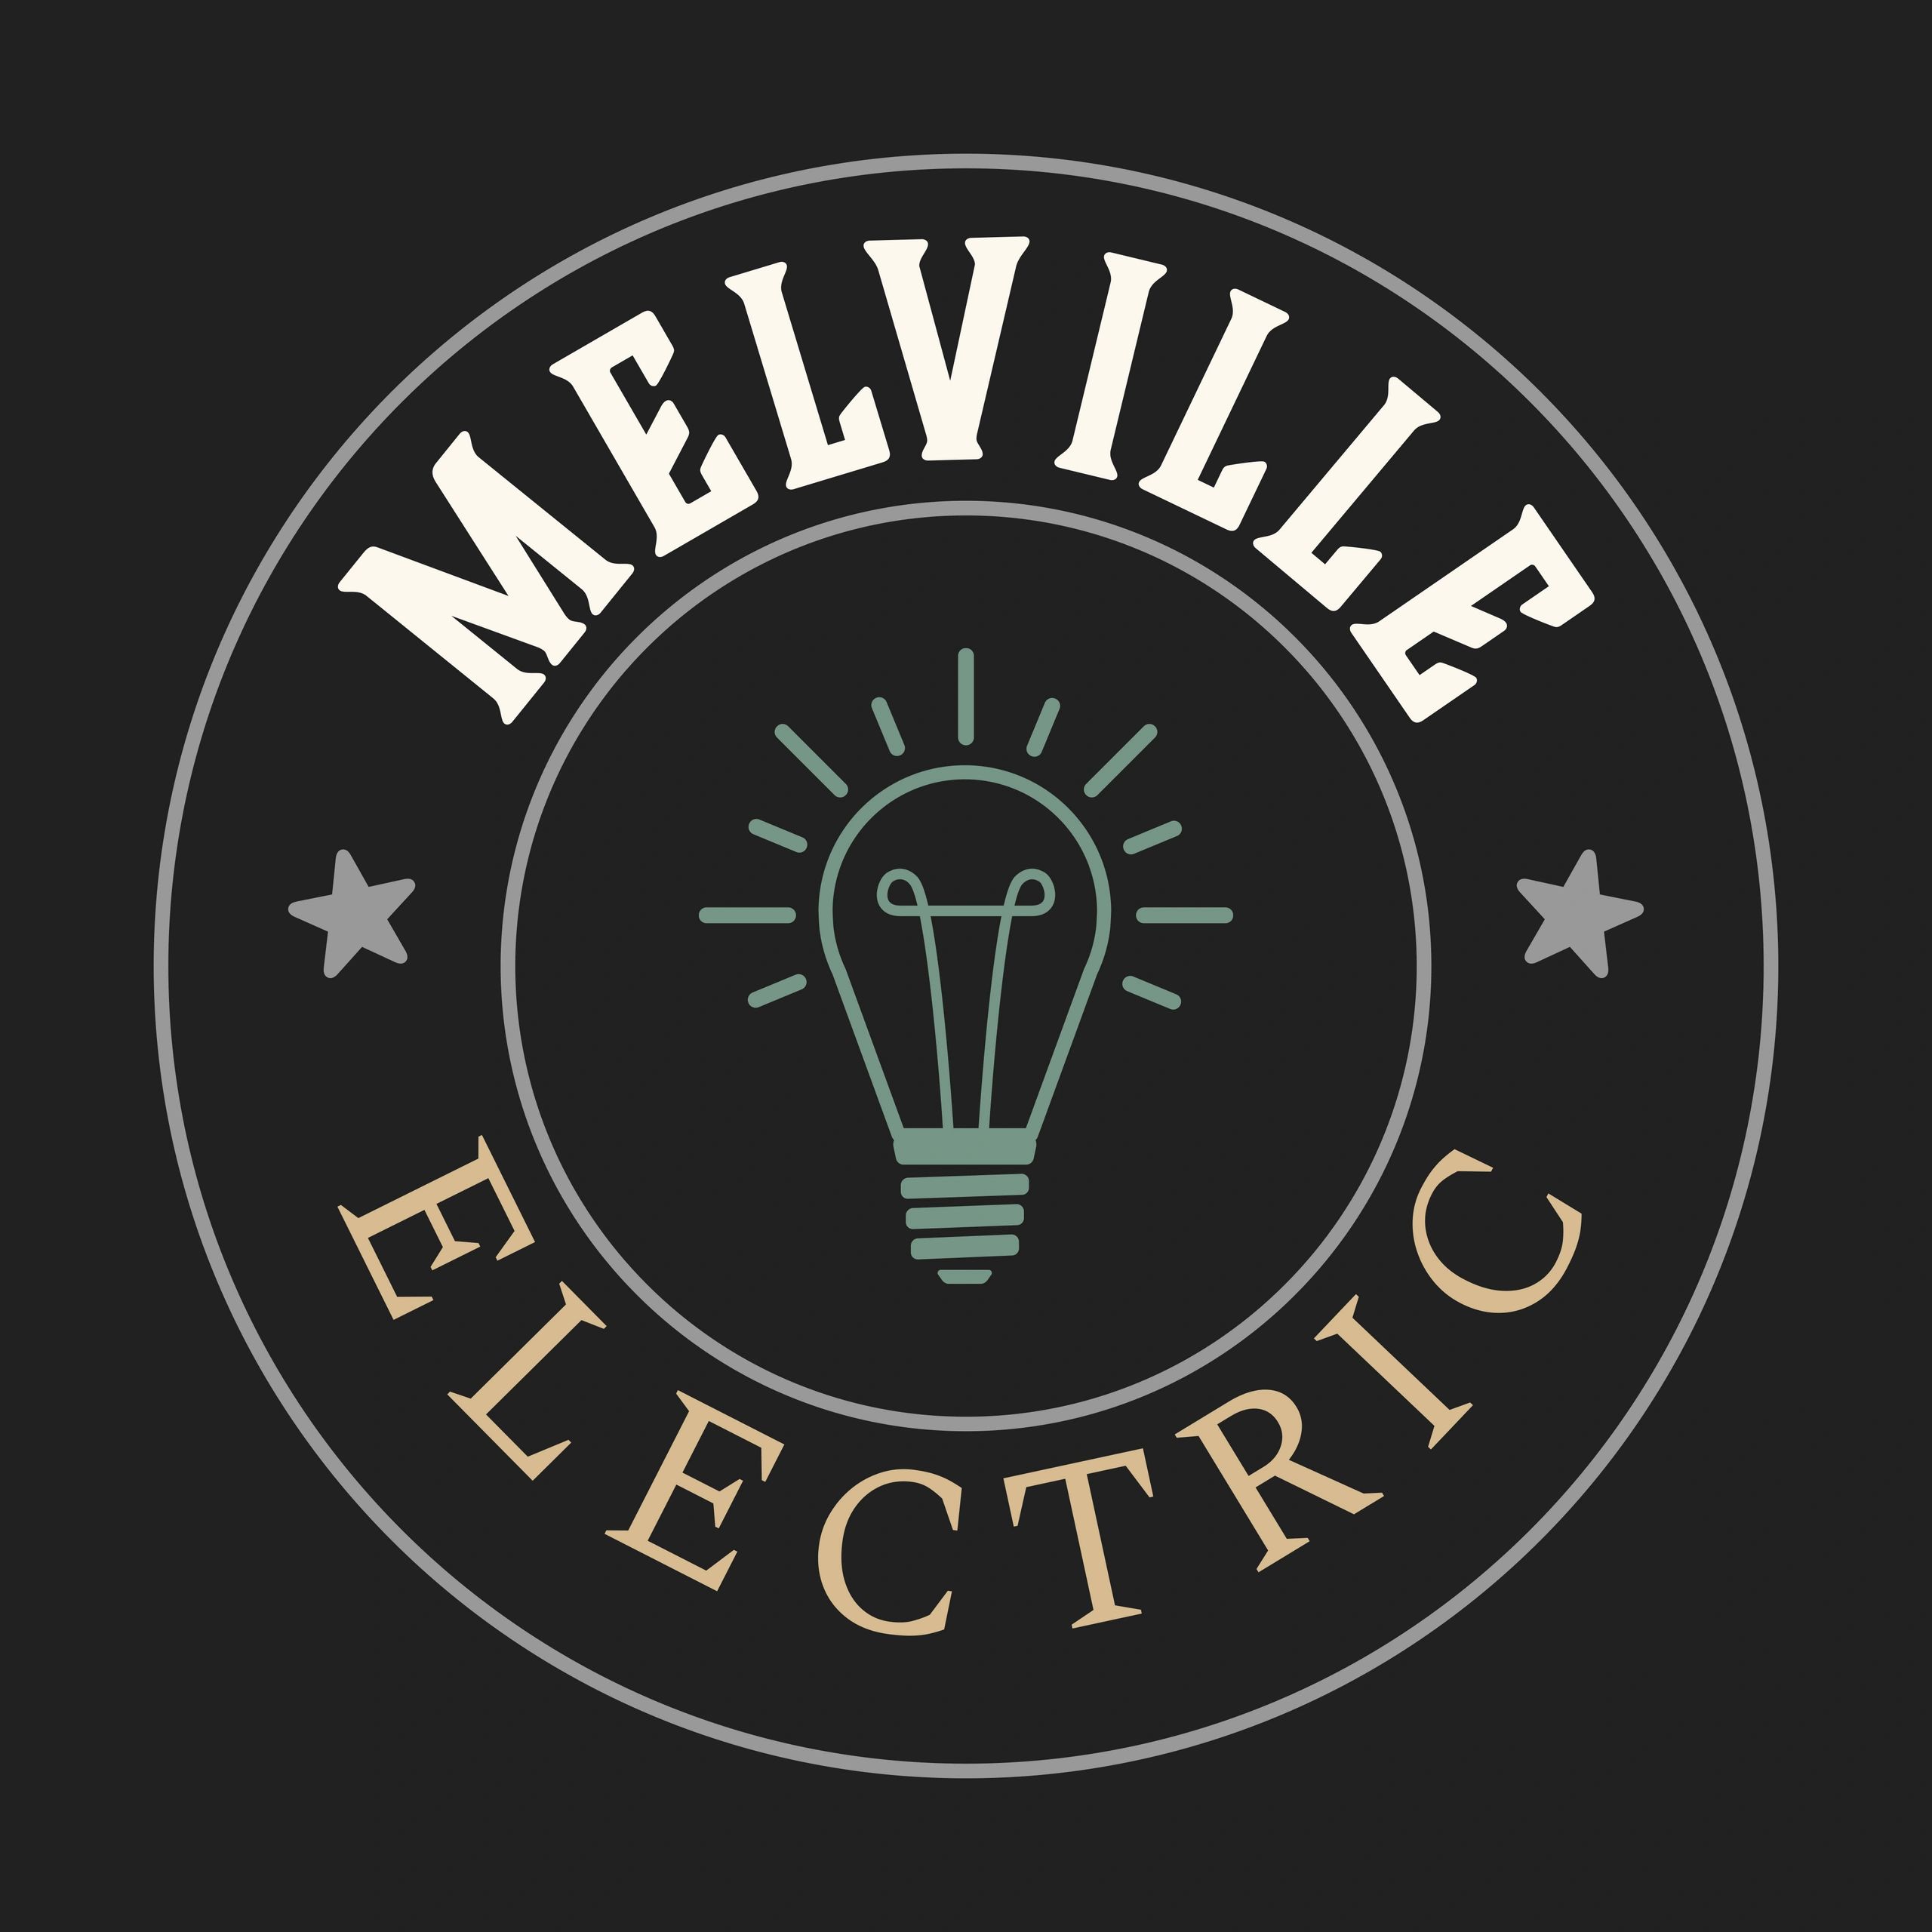 electrical-appliances-melville-electric